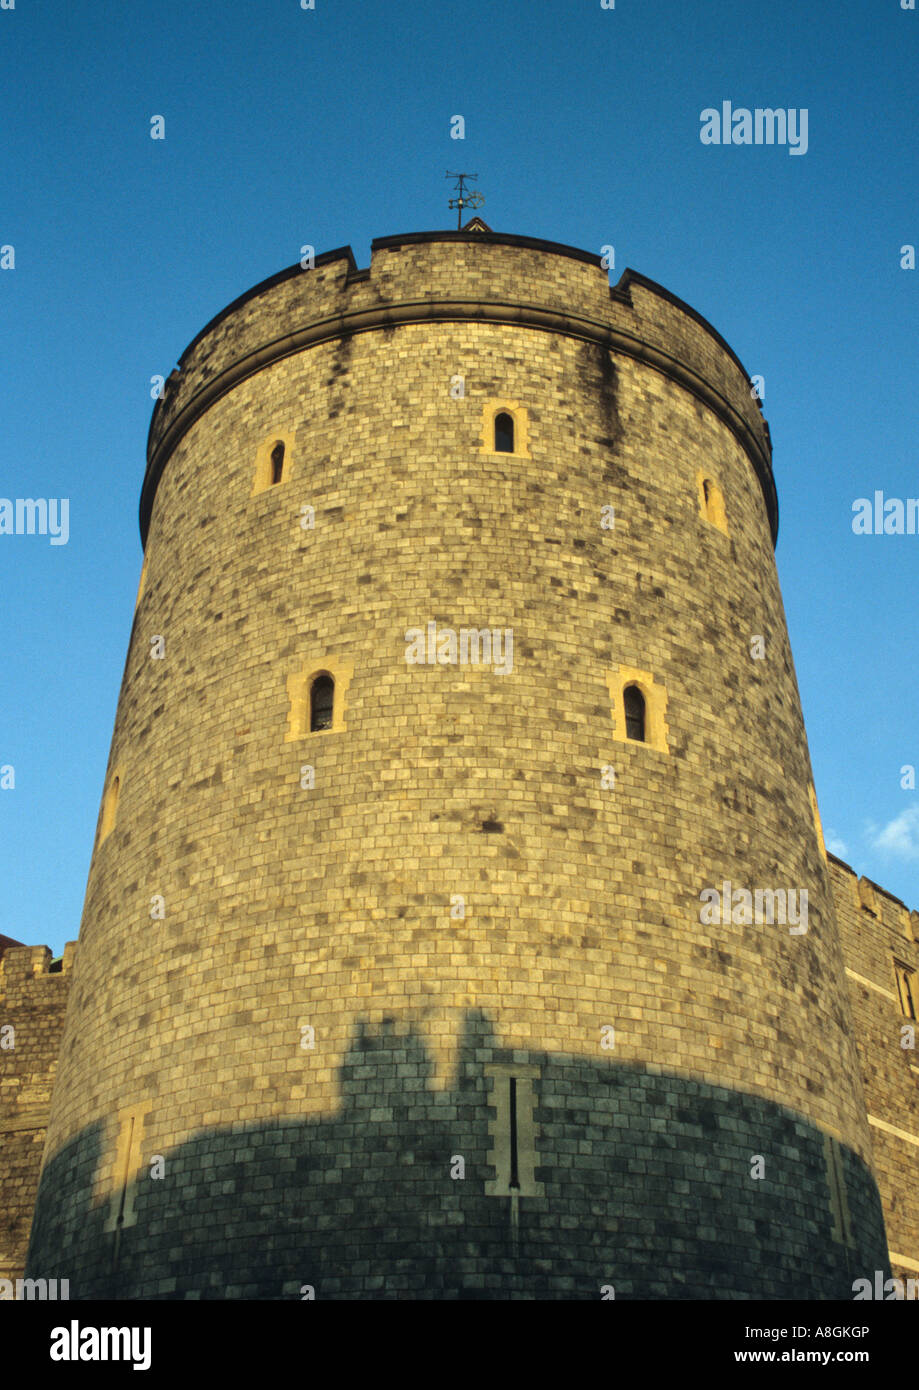 Turret At Windsor Castle in the uk Stock Photo